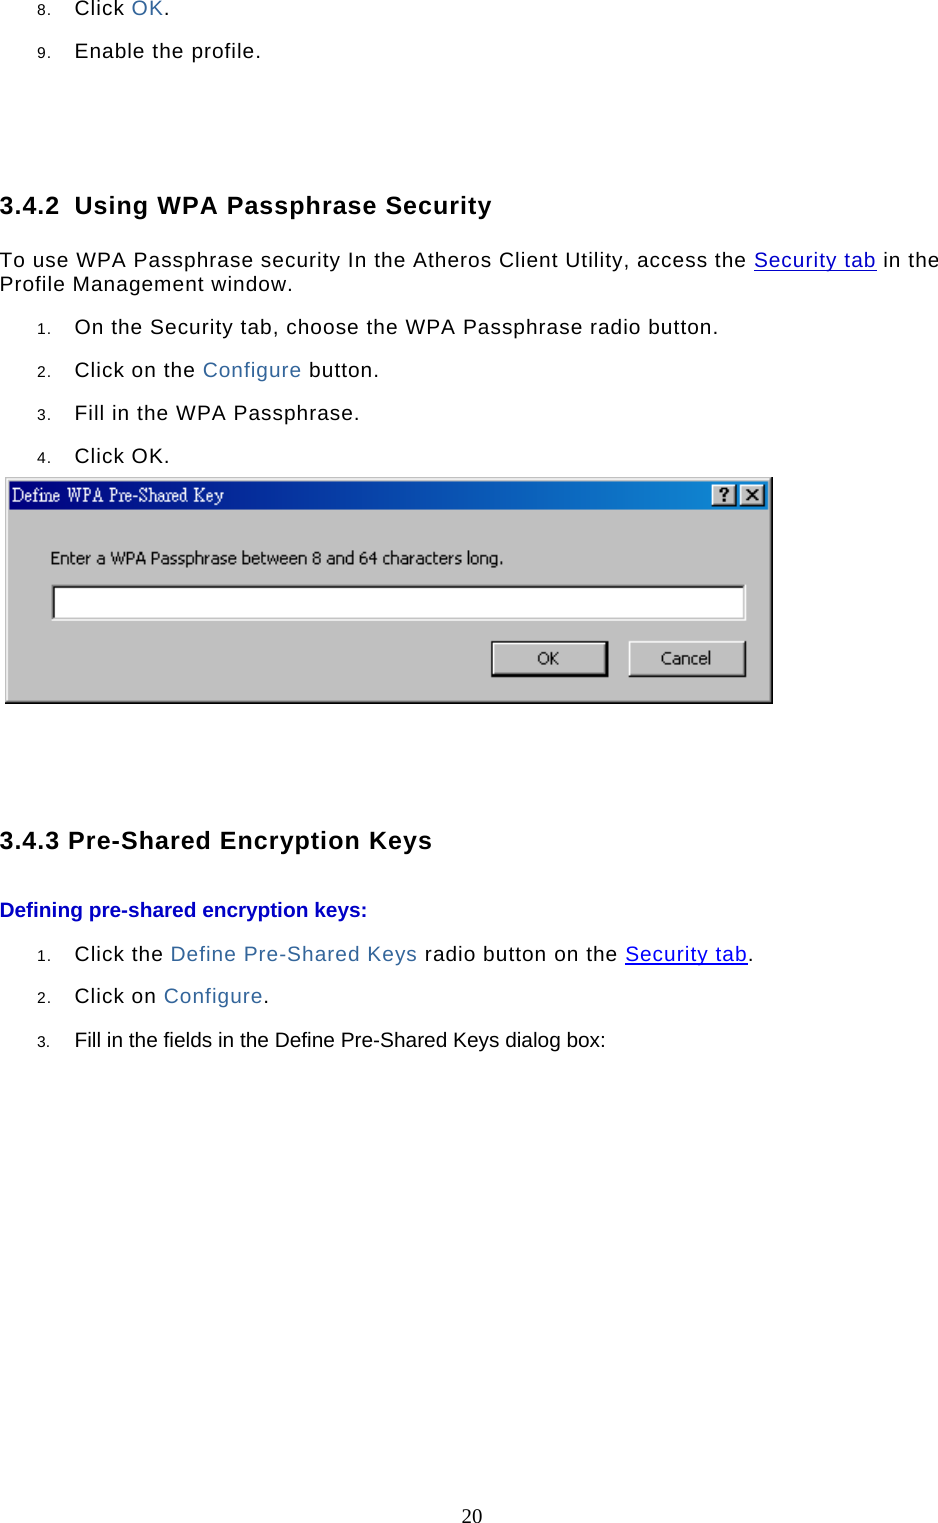  20 8.  Click OK.  9.  Enable the profile.      3.4.2  Using WPA Passphrase Security To use WPA Passphrase security In the Atheros Client Utility, access the Security tab in the Profile Management window.  1.  On the Security tab, choose the WPA Passphrase radio button.   2.  Click on the Configure button.  3.  Fill in the WPA Passphrase.   4.  Click OK.        3.4.3 Pre-Shared Encryption Keys Defining pre-shared encryption keys:  1.  Click the Define Pre-Shared Keys radio button on the Security tab.  2.  Click on Configure.  3.  Fill in the fields in the Define Pre-Shared Keys dialog box:  